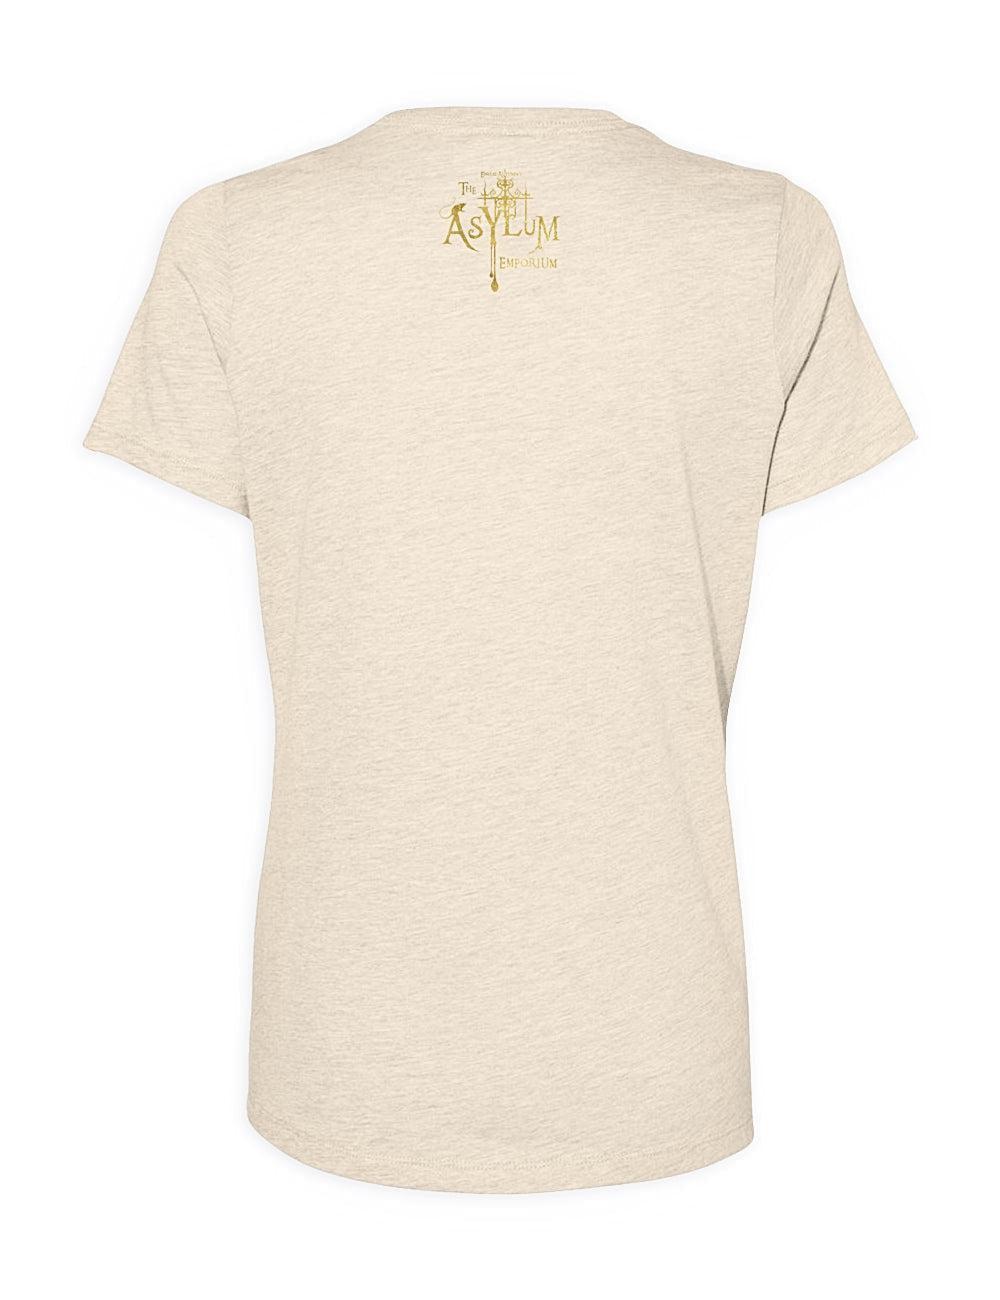 Royal Garden Relaxed Tee | Lady's